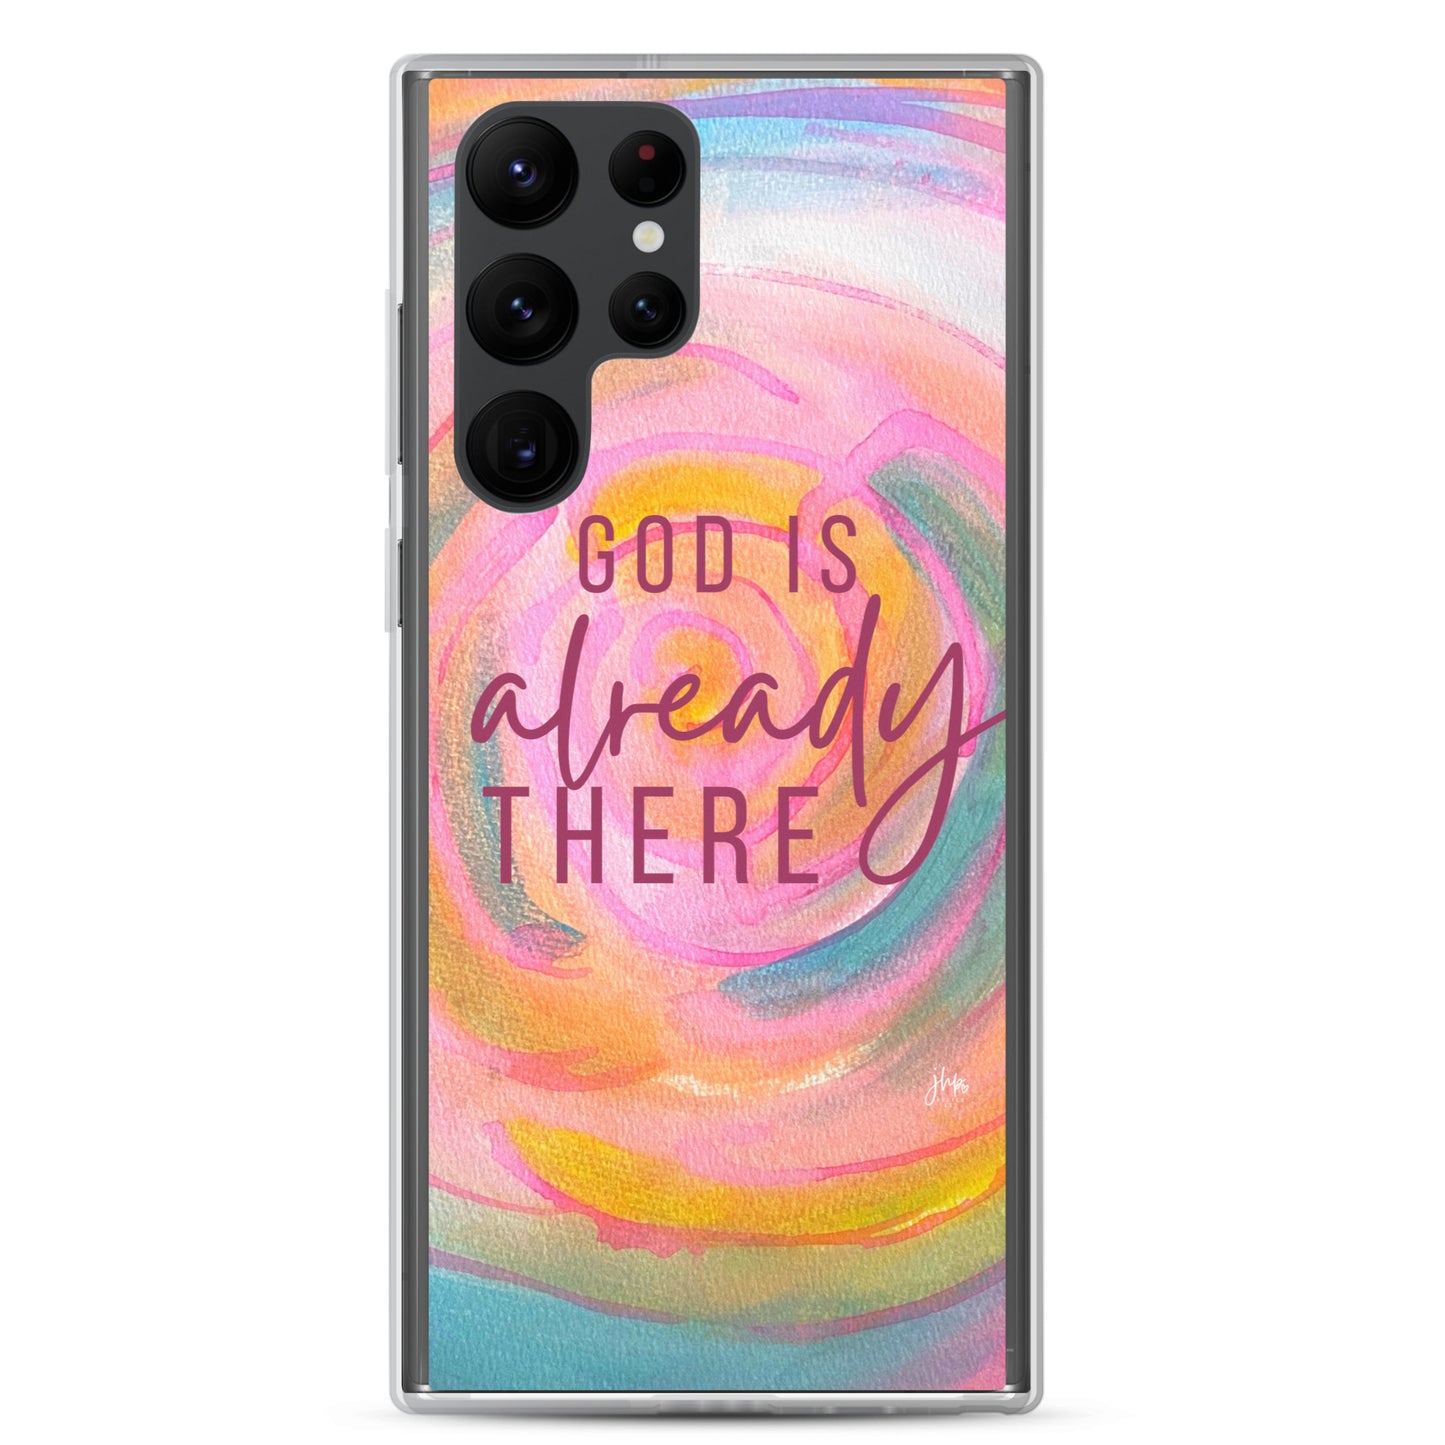 God is Already There (The Ripple Effect, 3) Samsung Case